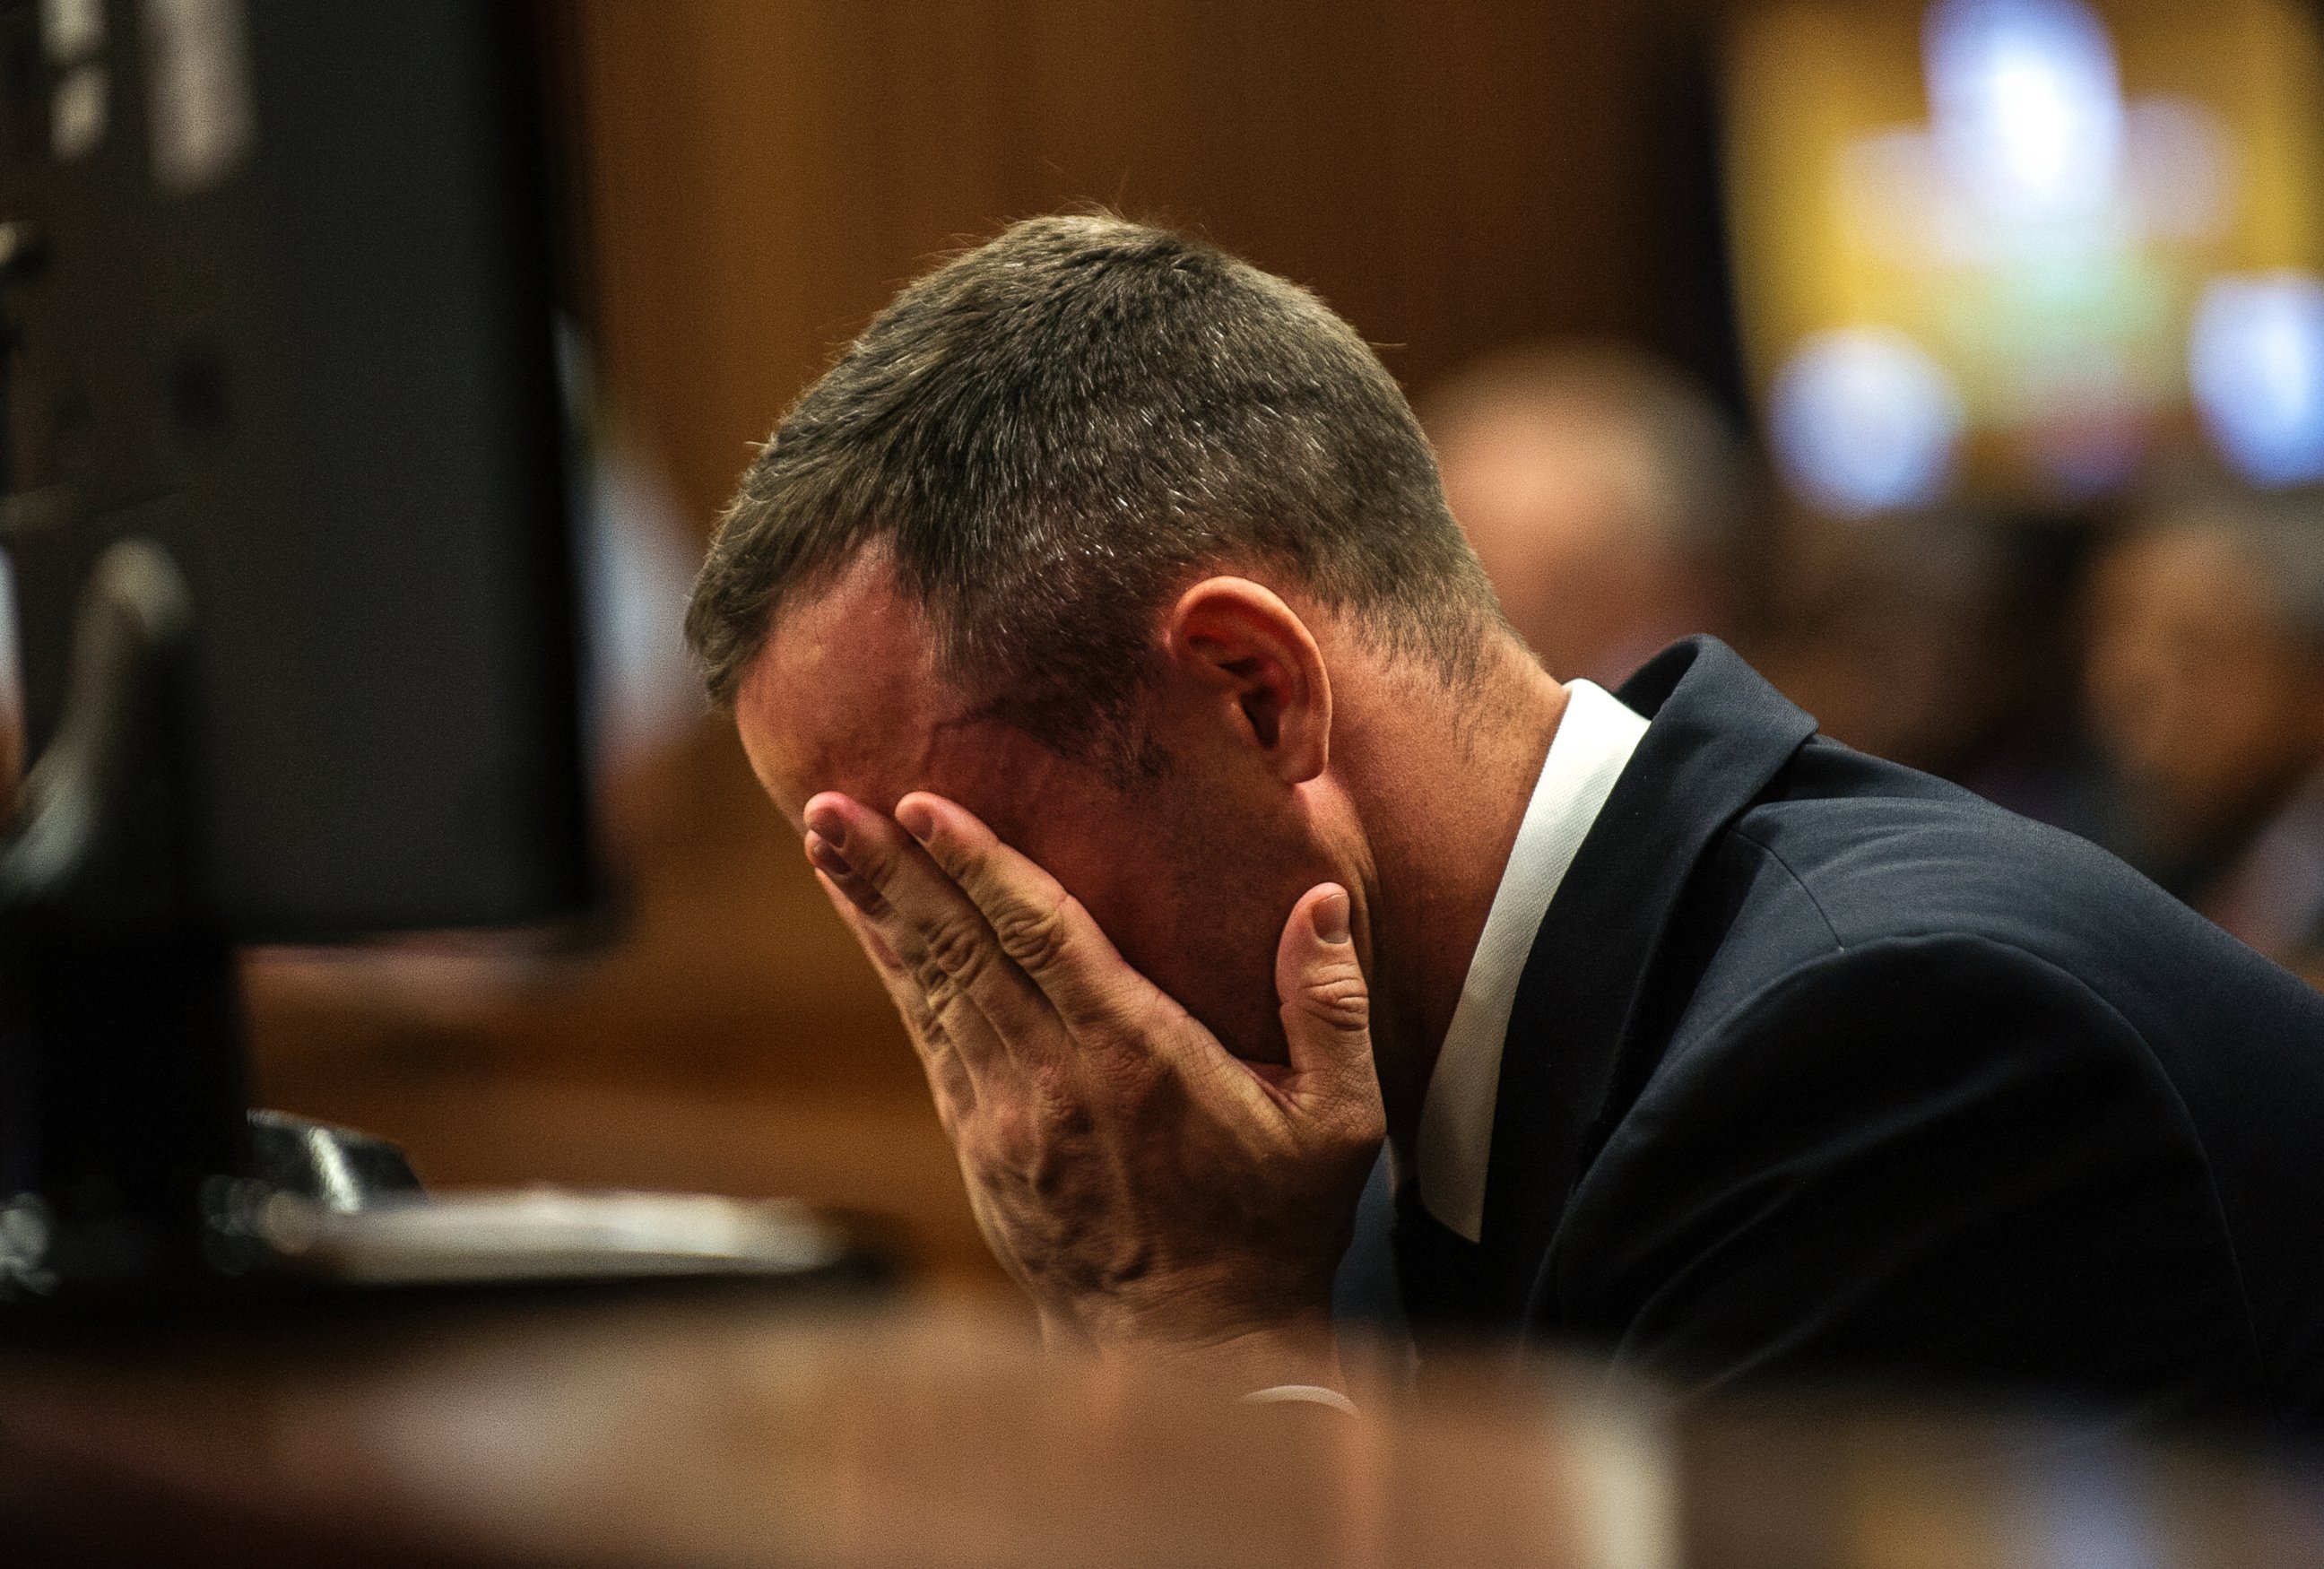 PHOTO: Oscar Pistorius cradles his head in his hands as he listens to evidence during his murder trial in Pretoria, South Africa, May 8, 2014.